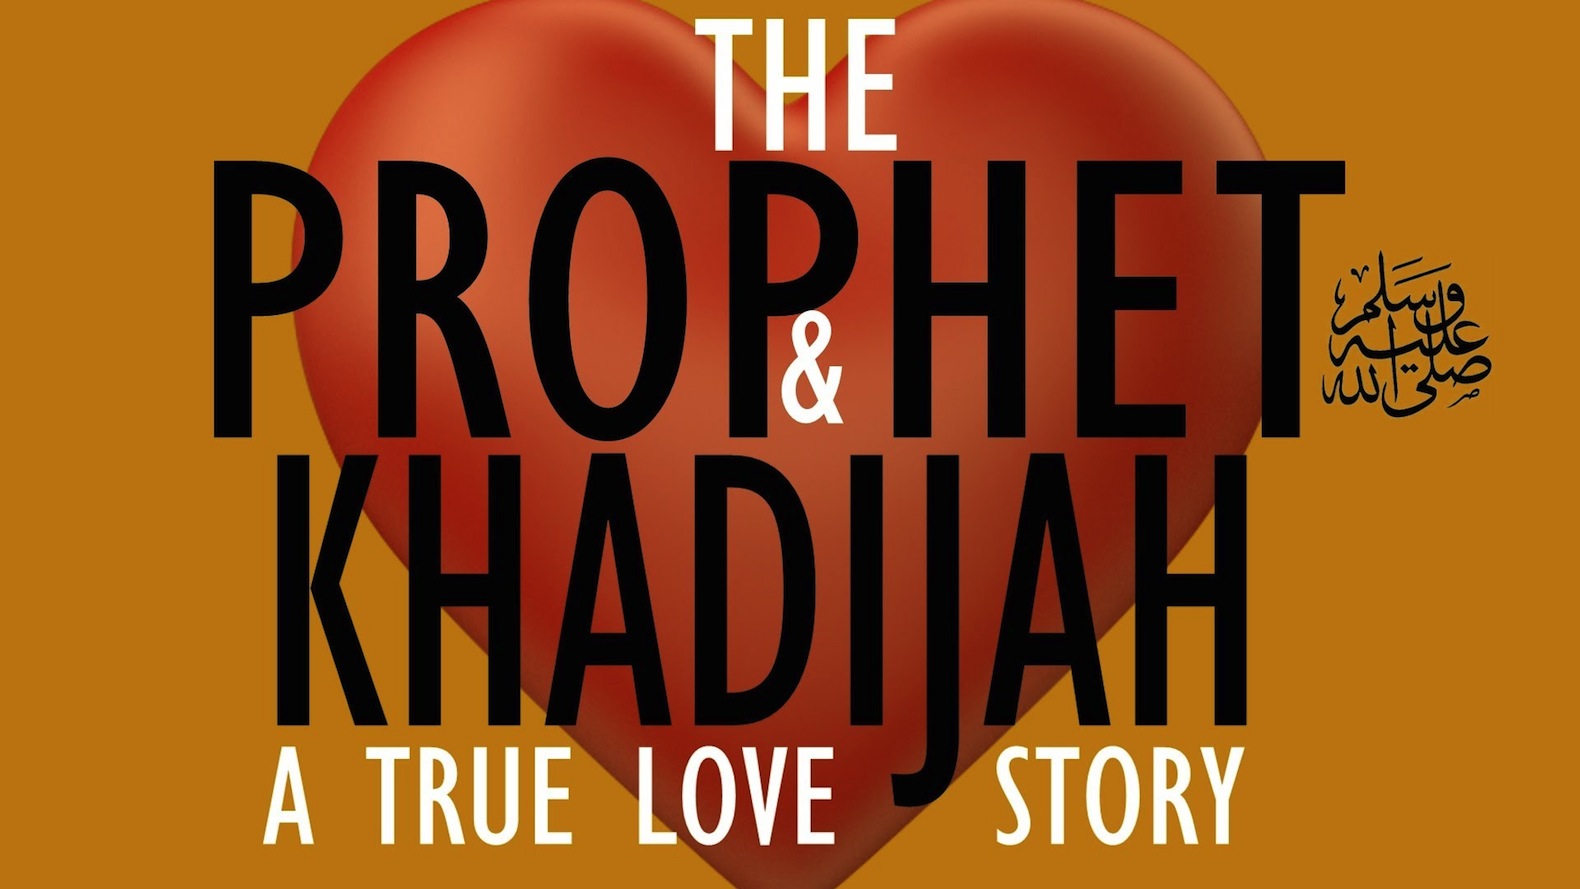 The Prophet & Khadijah's Love Story  - How it All Started? - About Islam